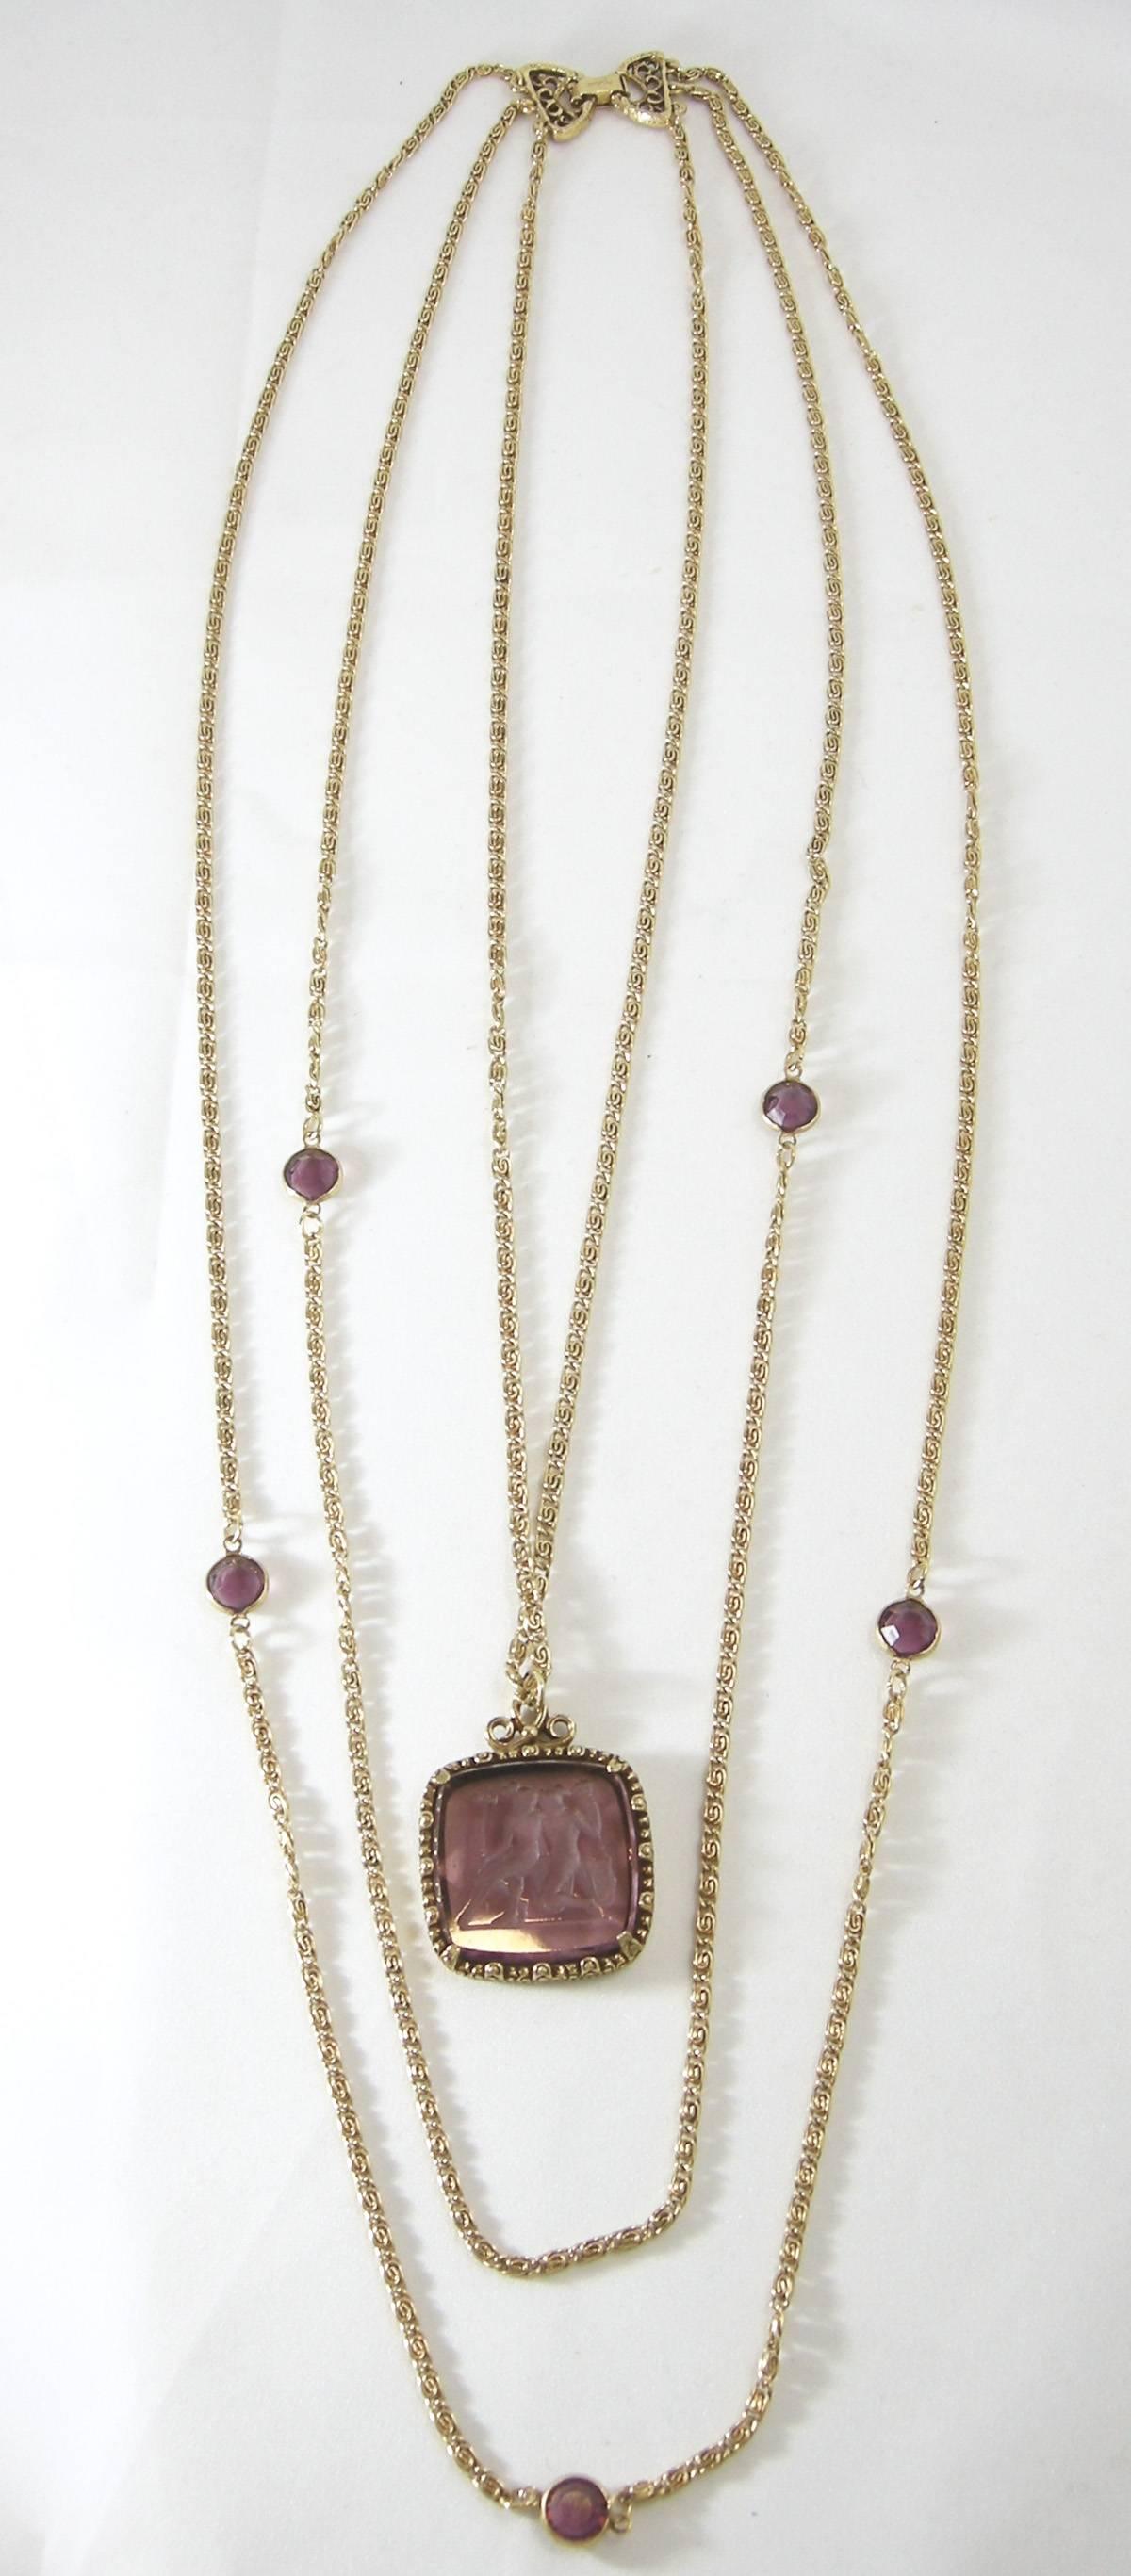 This Goldette 1960s necklace is one of the most sought-after necklaces. It has a purple Intaglio pendant in the middle with two more chains interspersed with purple glass accents.  The longest chain is 25” and the pendant in the middle is 1-1/4”. 